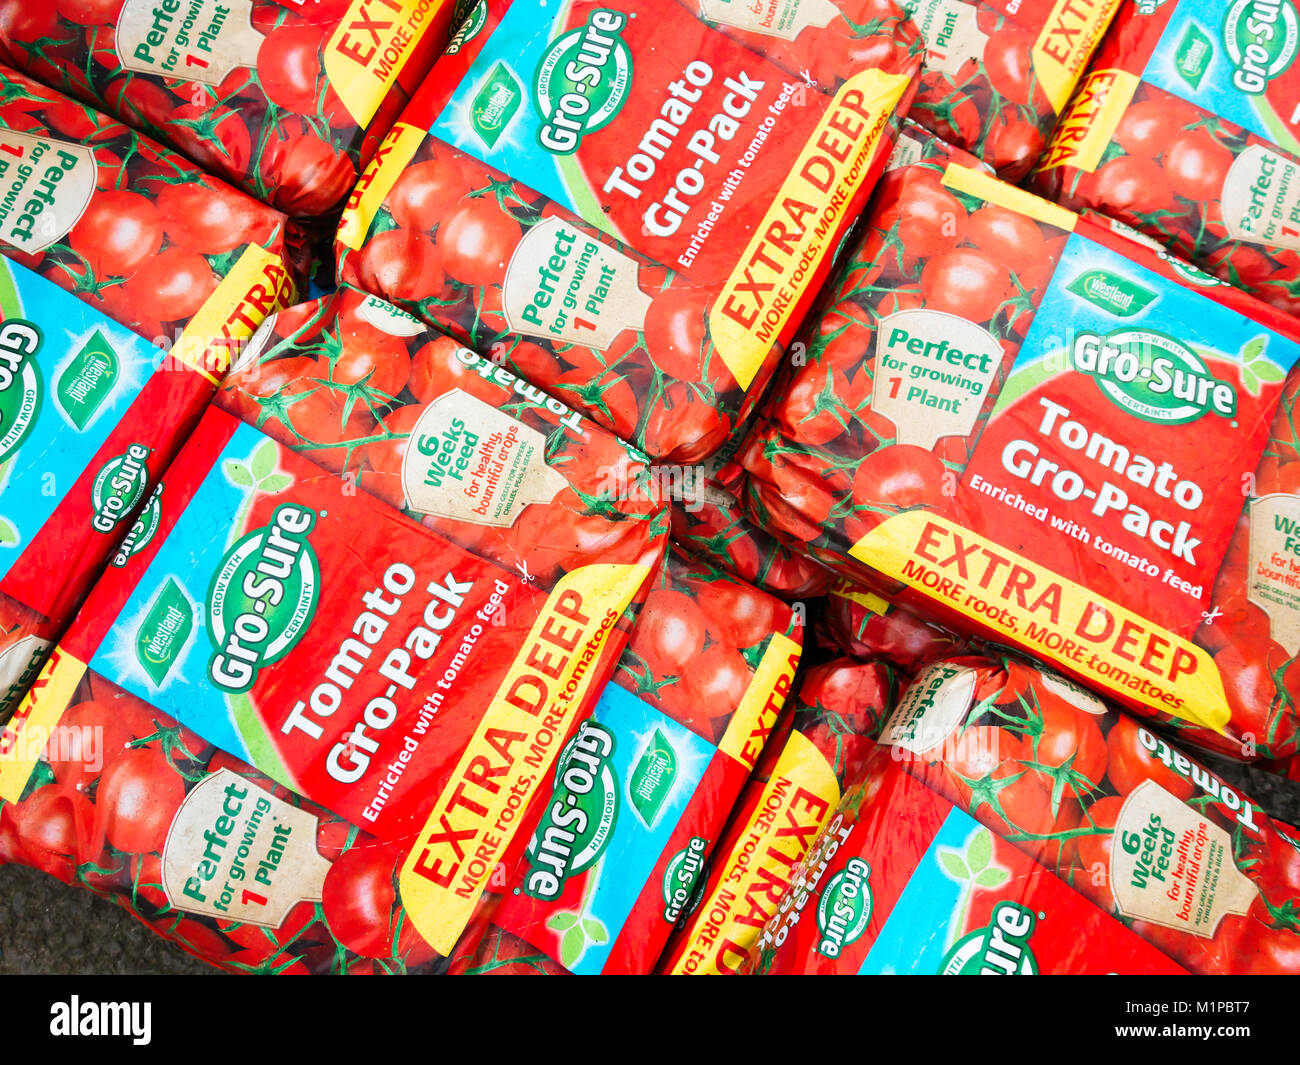 Stack of bags of Gro-Sure tomato grow pack deep bags ideal for one tomato  plant in a garden centre Stock Photo